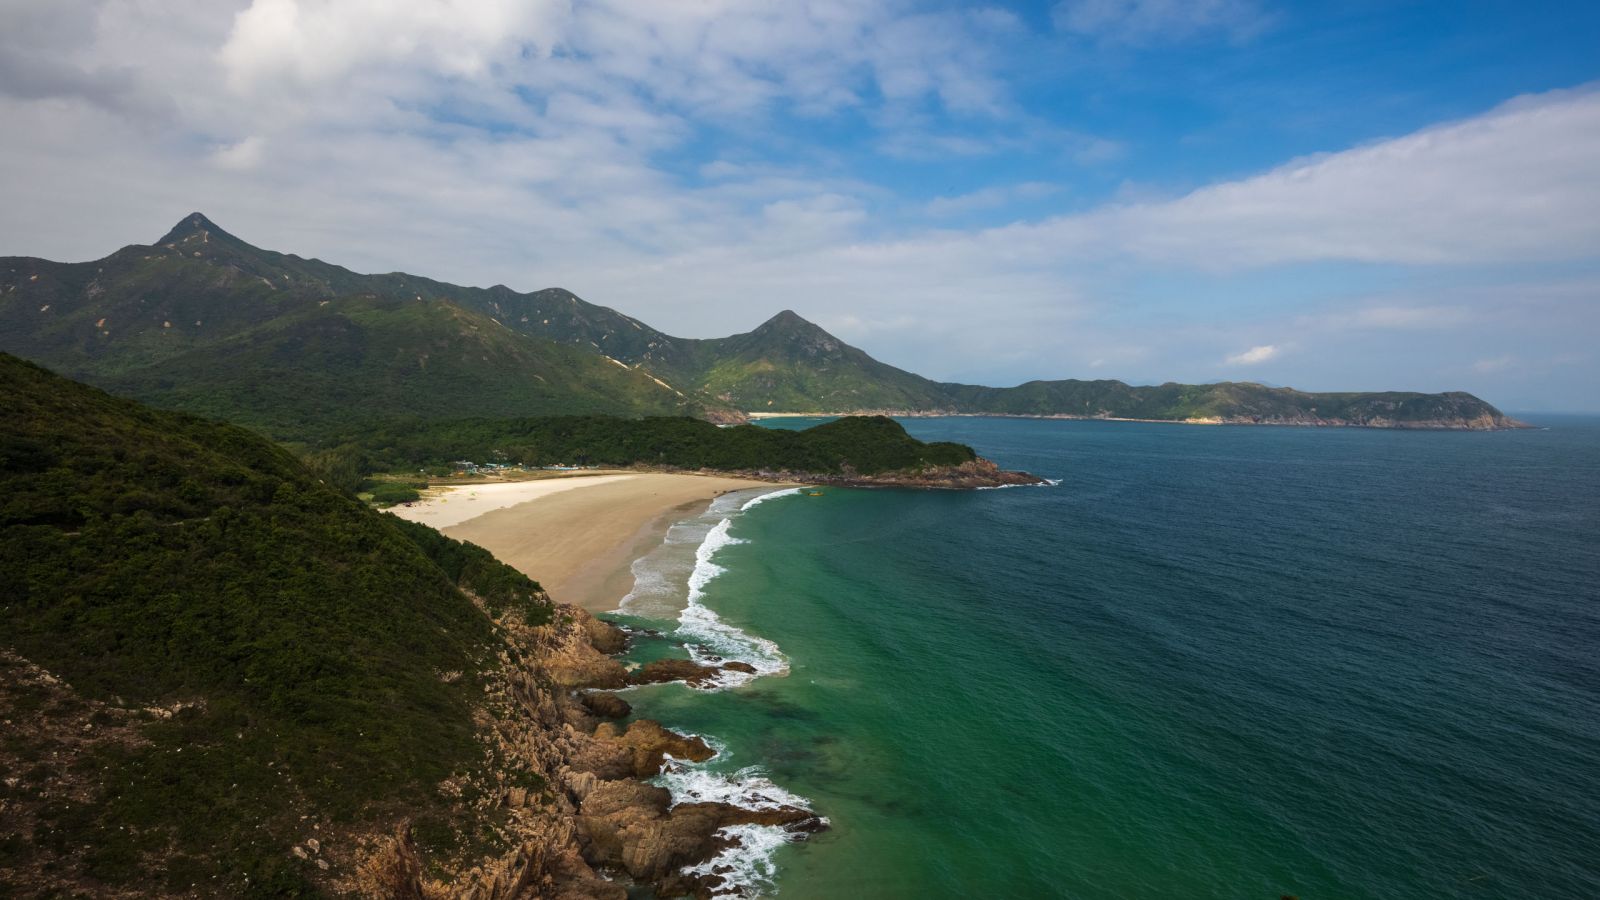 Ham Tin Wan, the unspoiled natural beauty